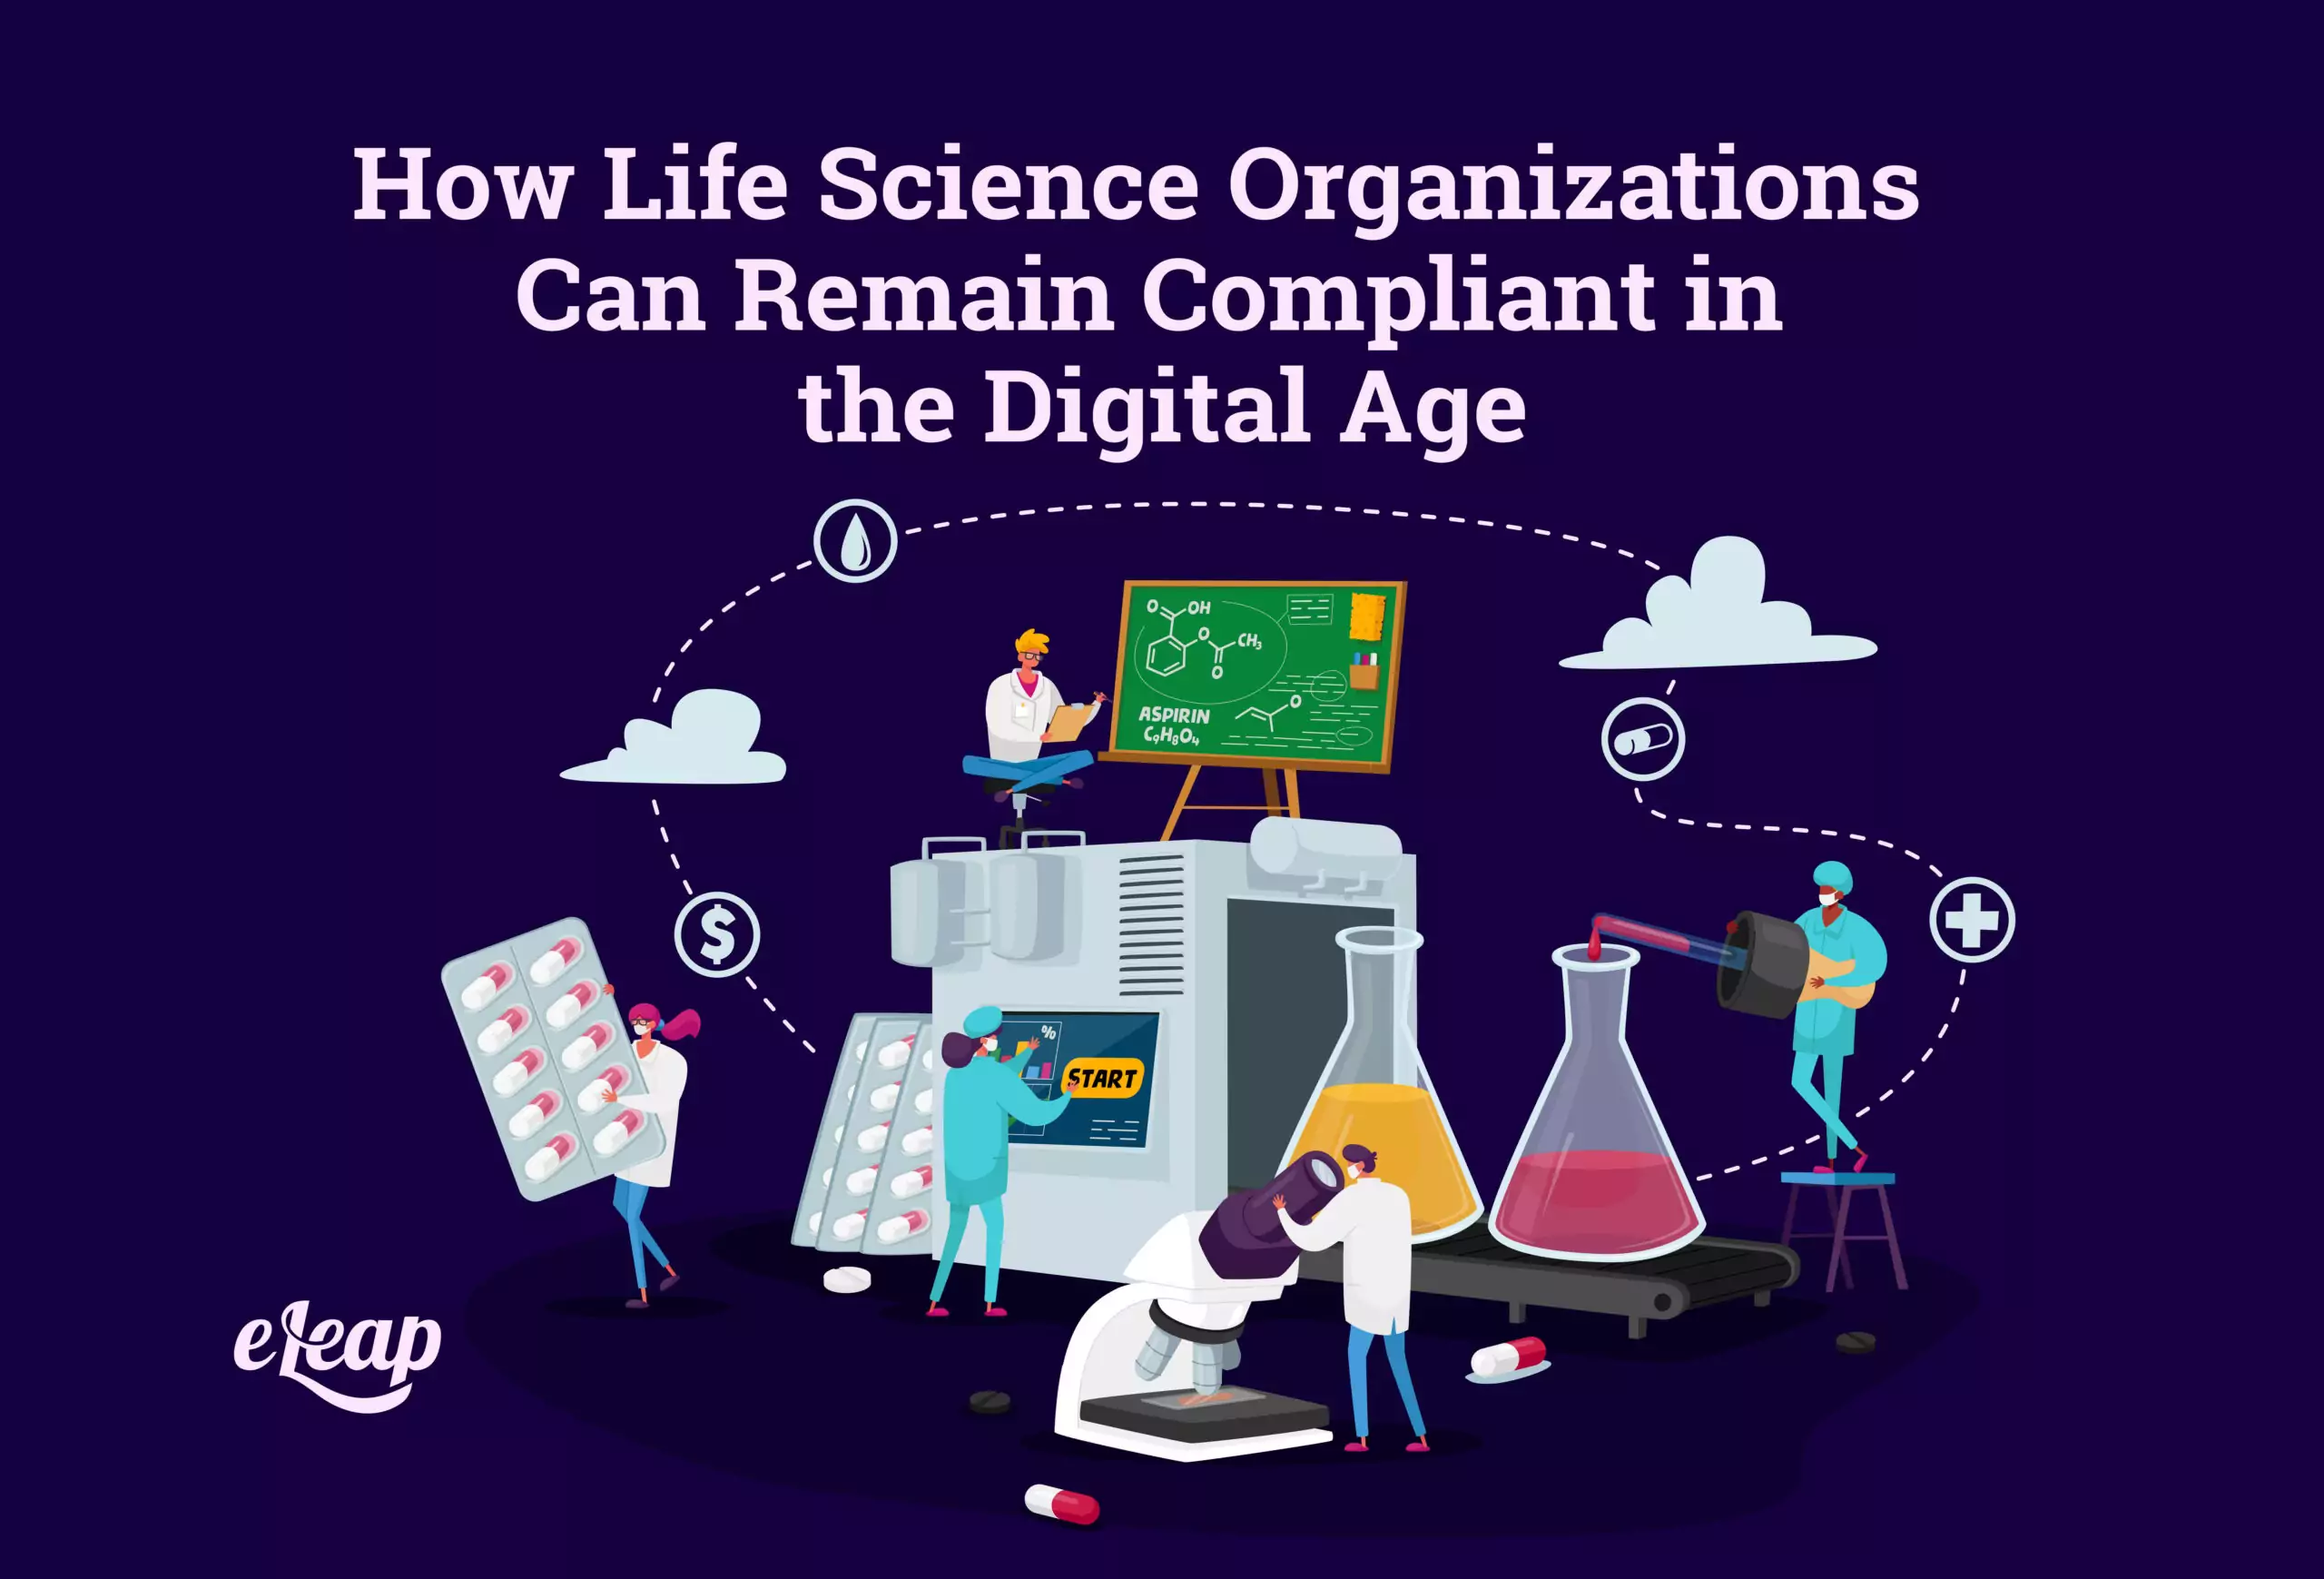 How Life Science Organizations Can Remain Compliant in the Digital Age